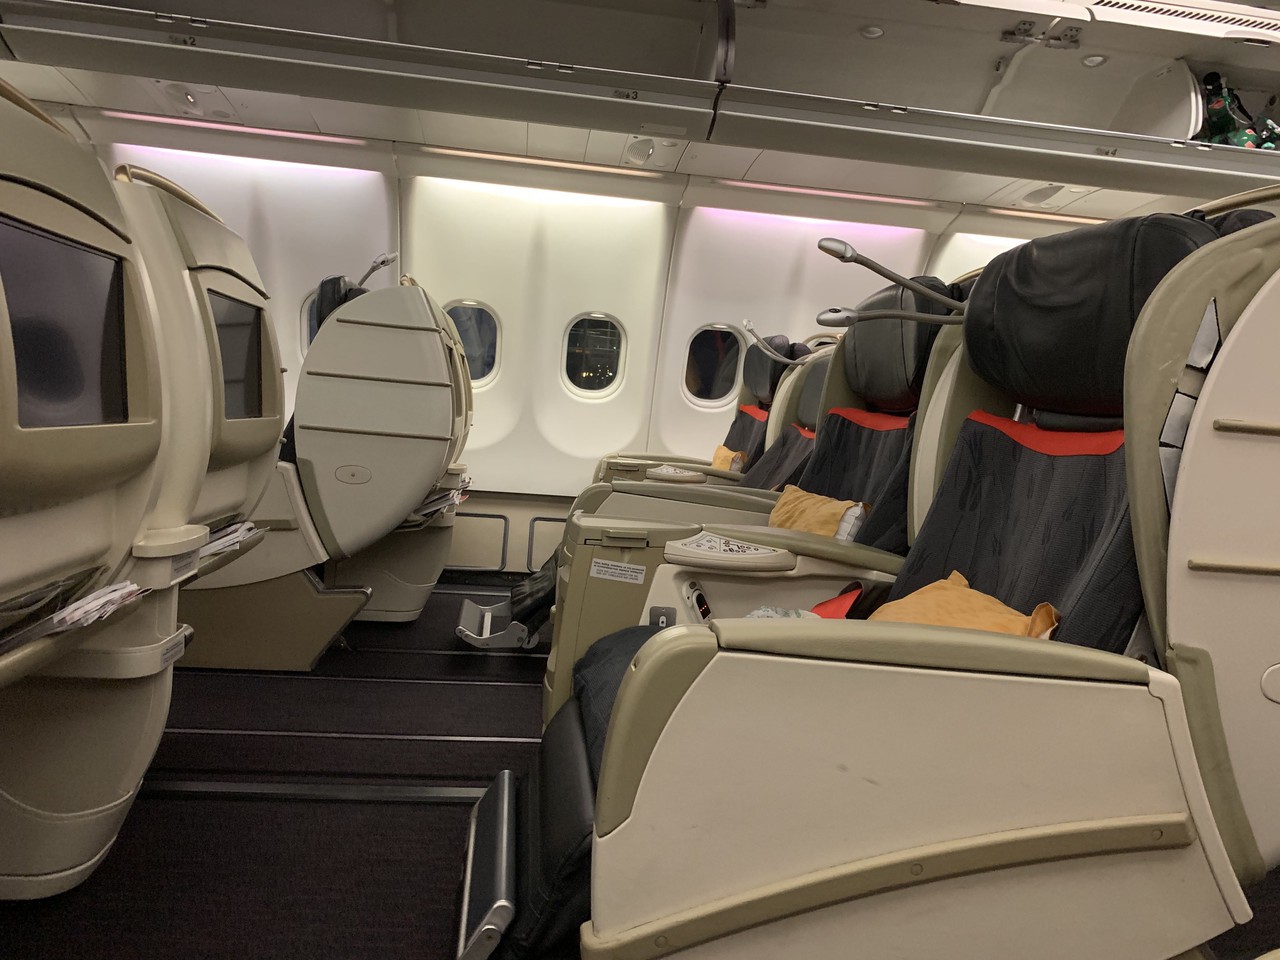 Review of Turkish Airlines flight from Istanbul to Amman in Business